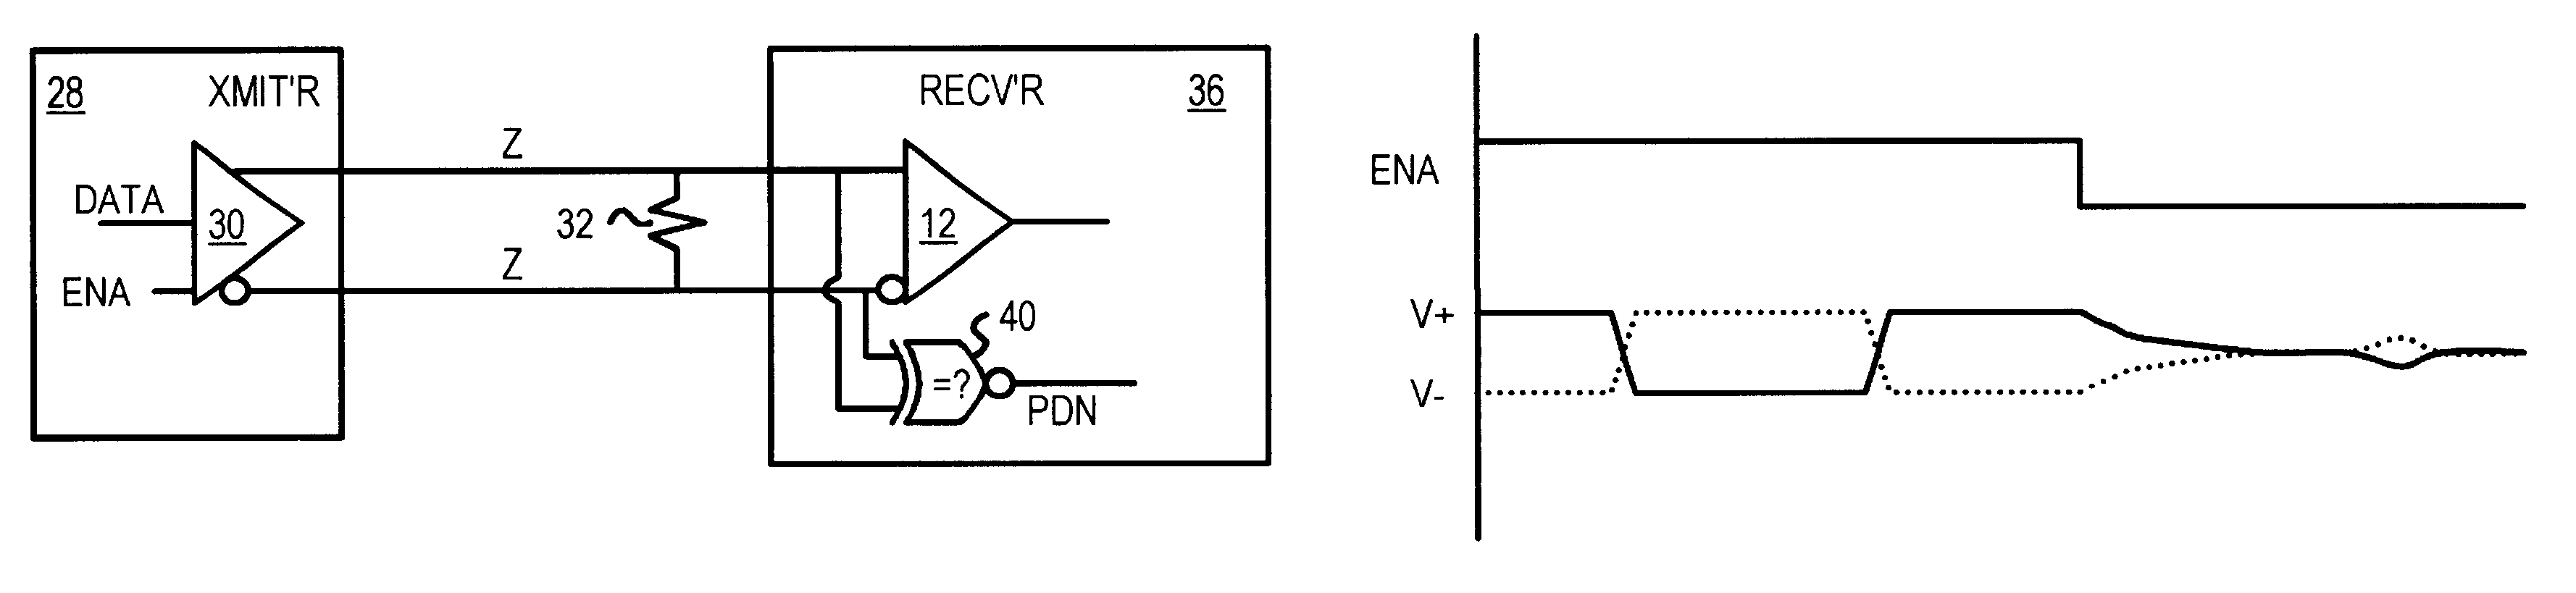 Power down mode signaled by differential transmitter's high-Z state detected by receiver sensing same voltage on differential lines